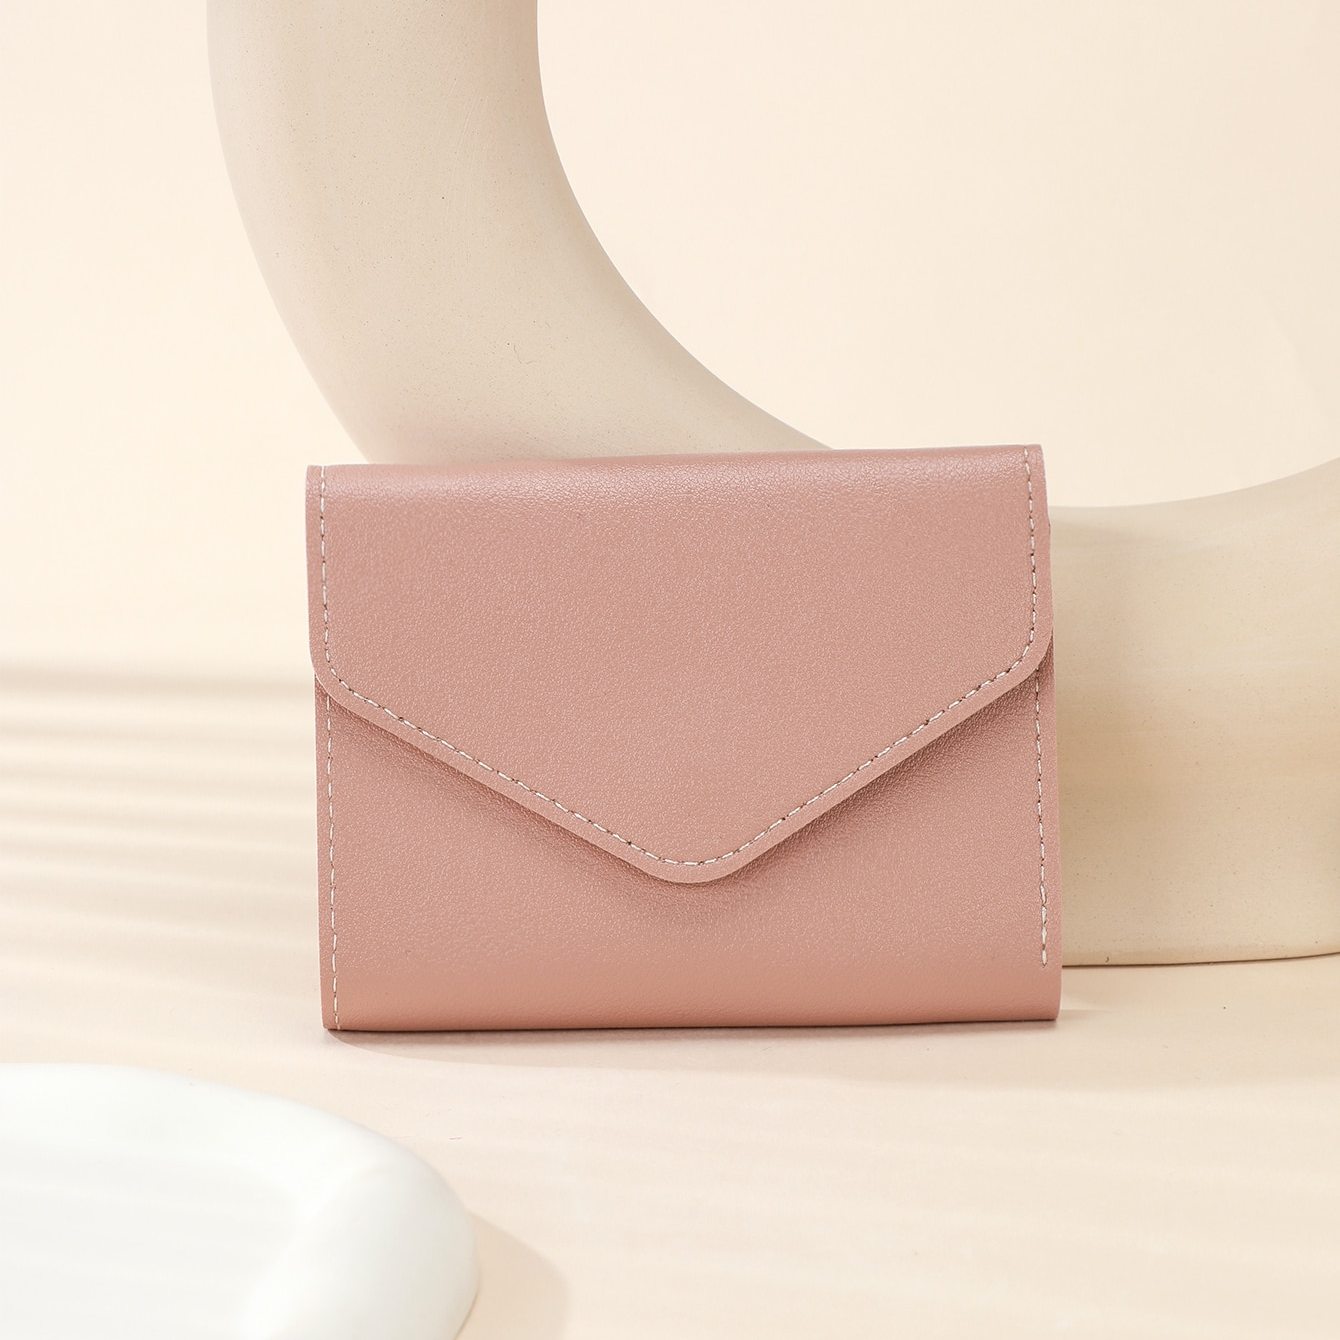 Love Heart Leather Wallet for Ladies for Girl Money Pocket Organizer  Storage Clutch Bags Women's Wallets Coin Purses Card Holder DARK PINK